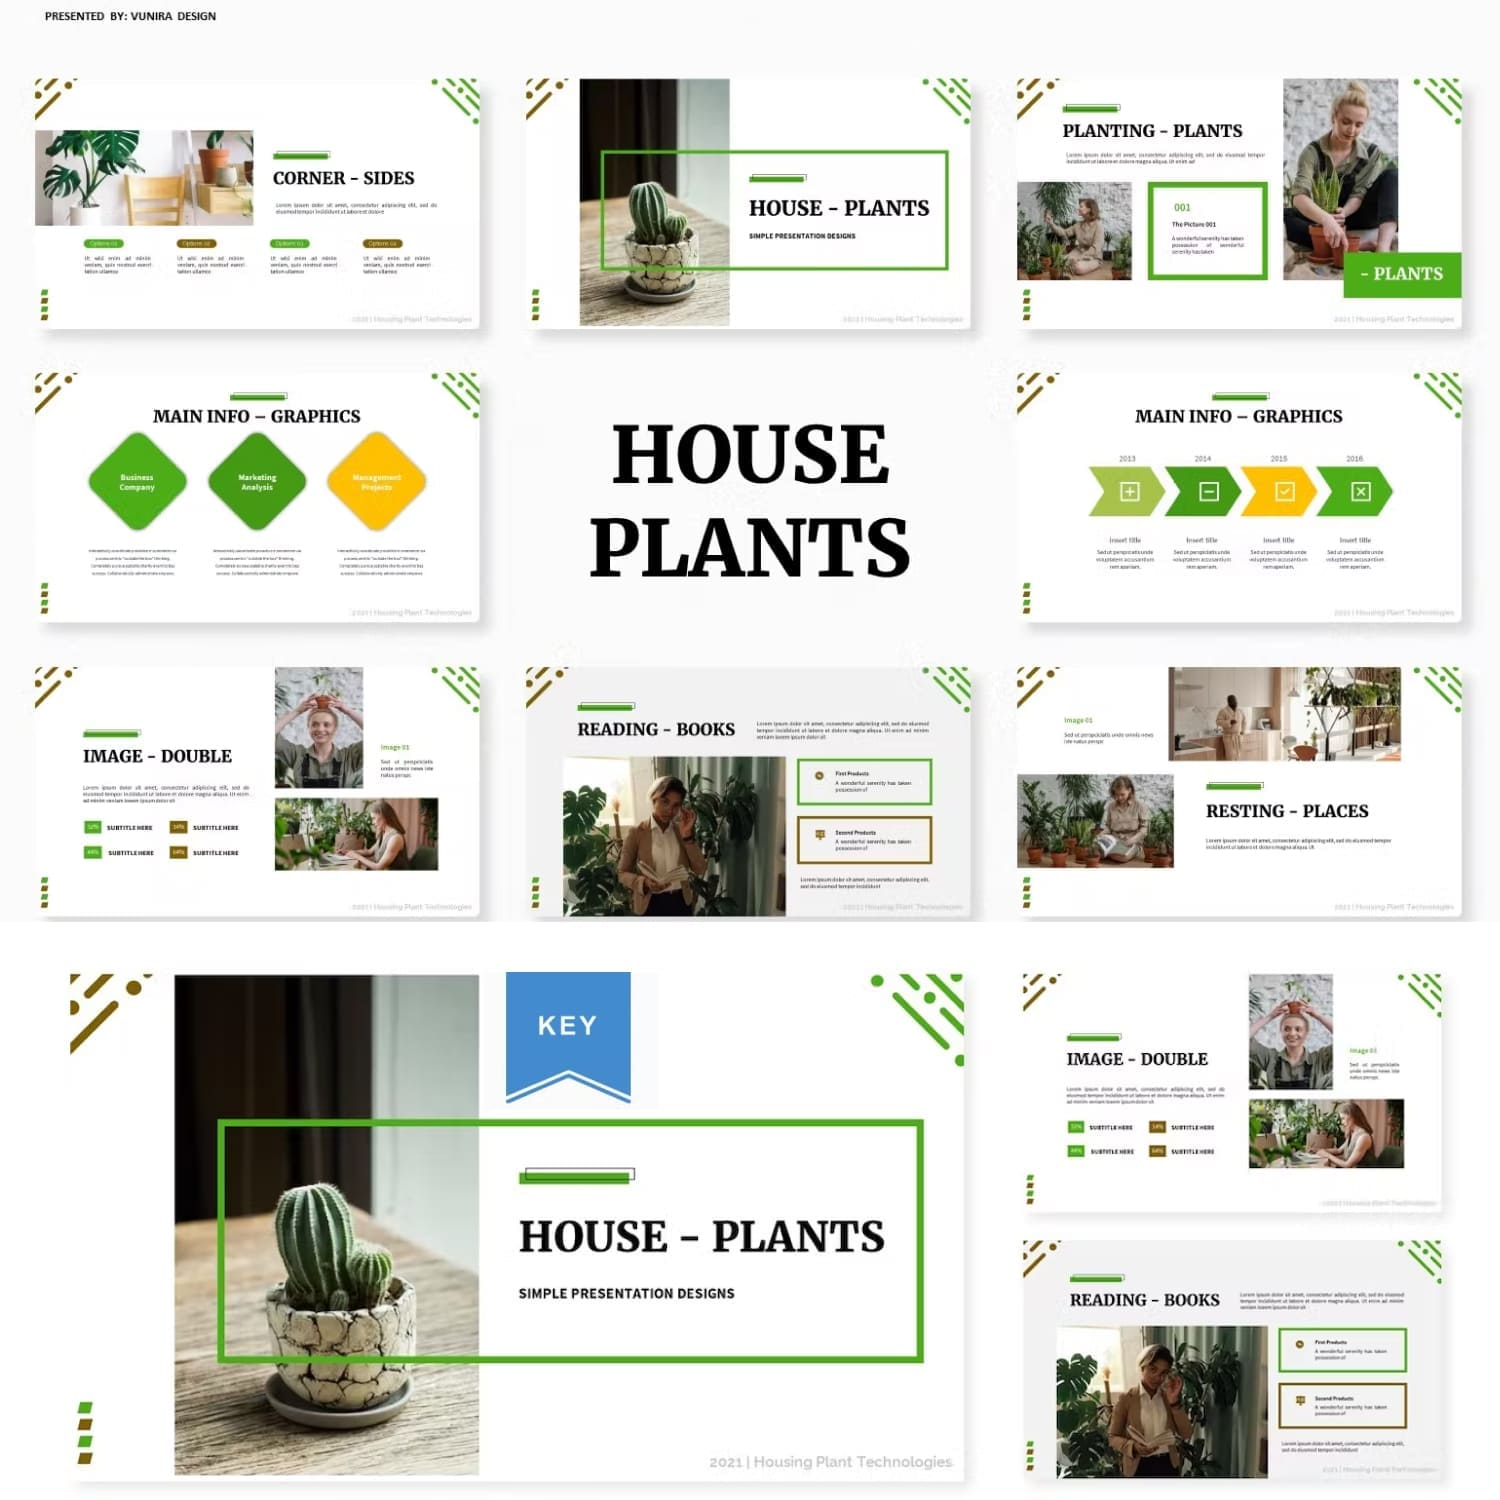 The best time spent with houseplants is depicted in a simple design presentation.